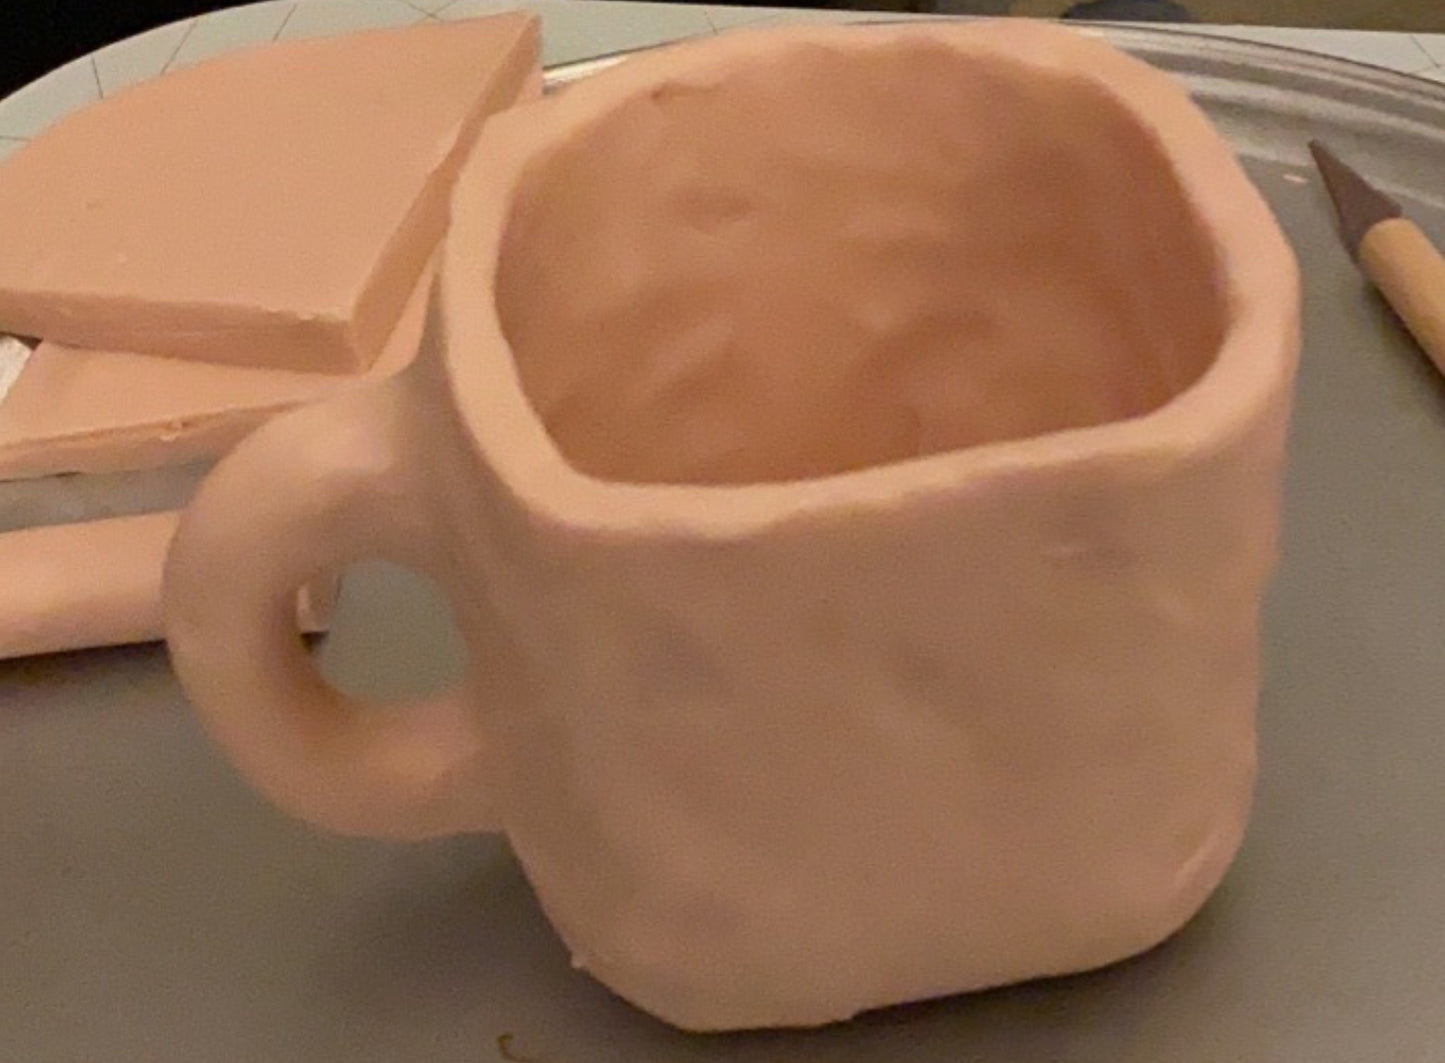 Mug base completed without Spongebob face or texture.